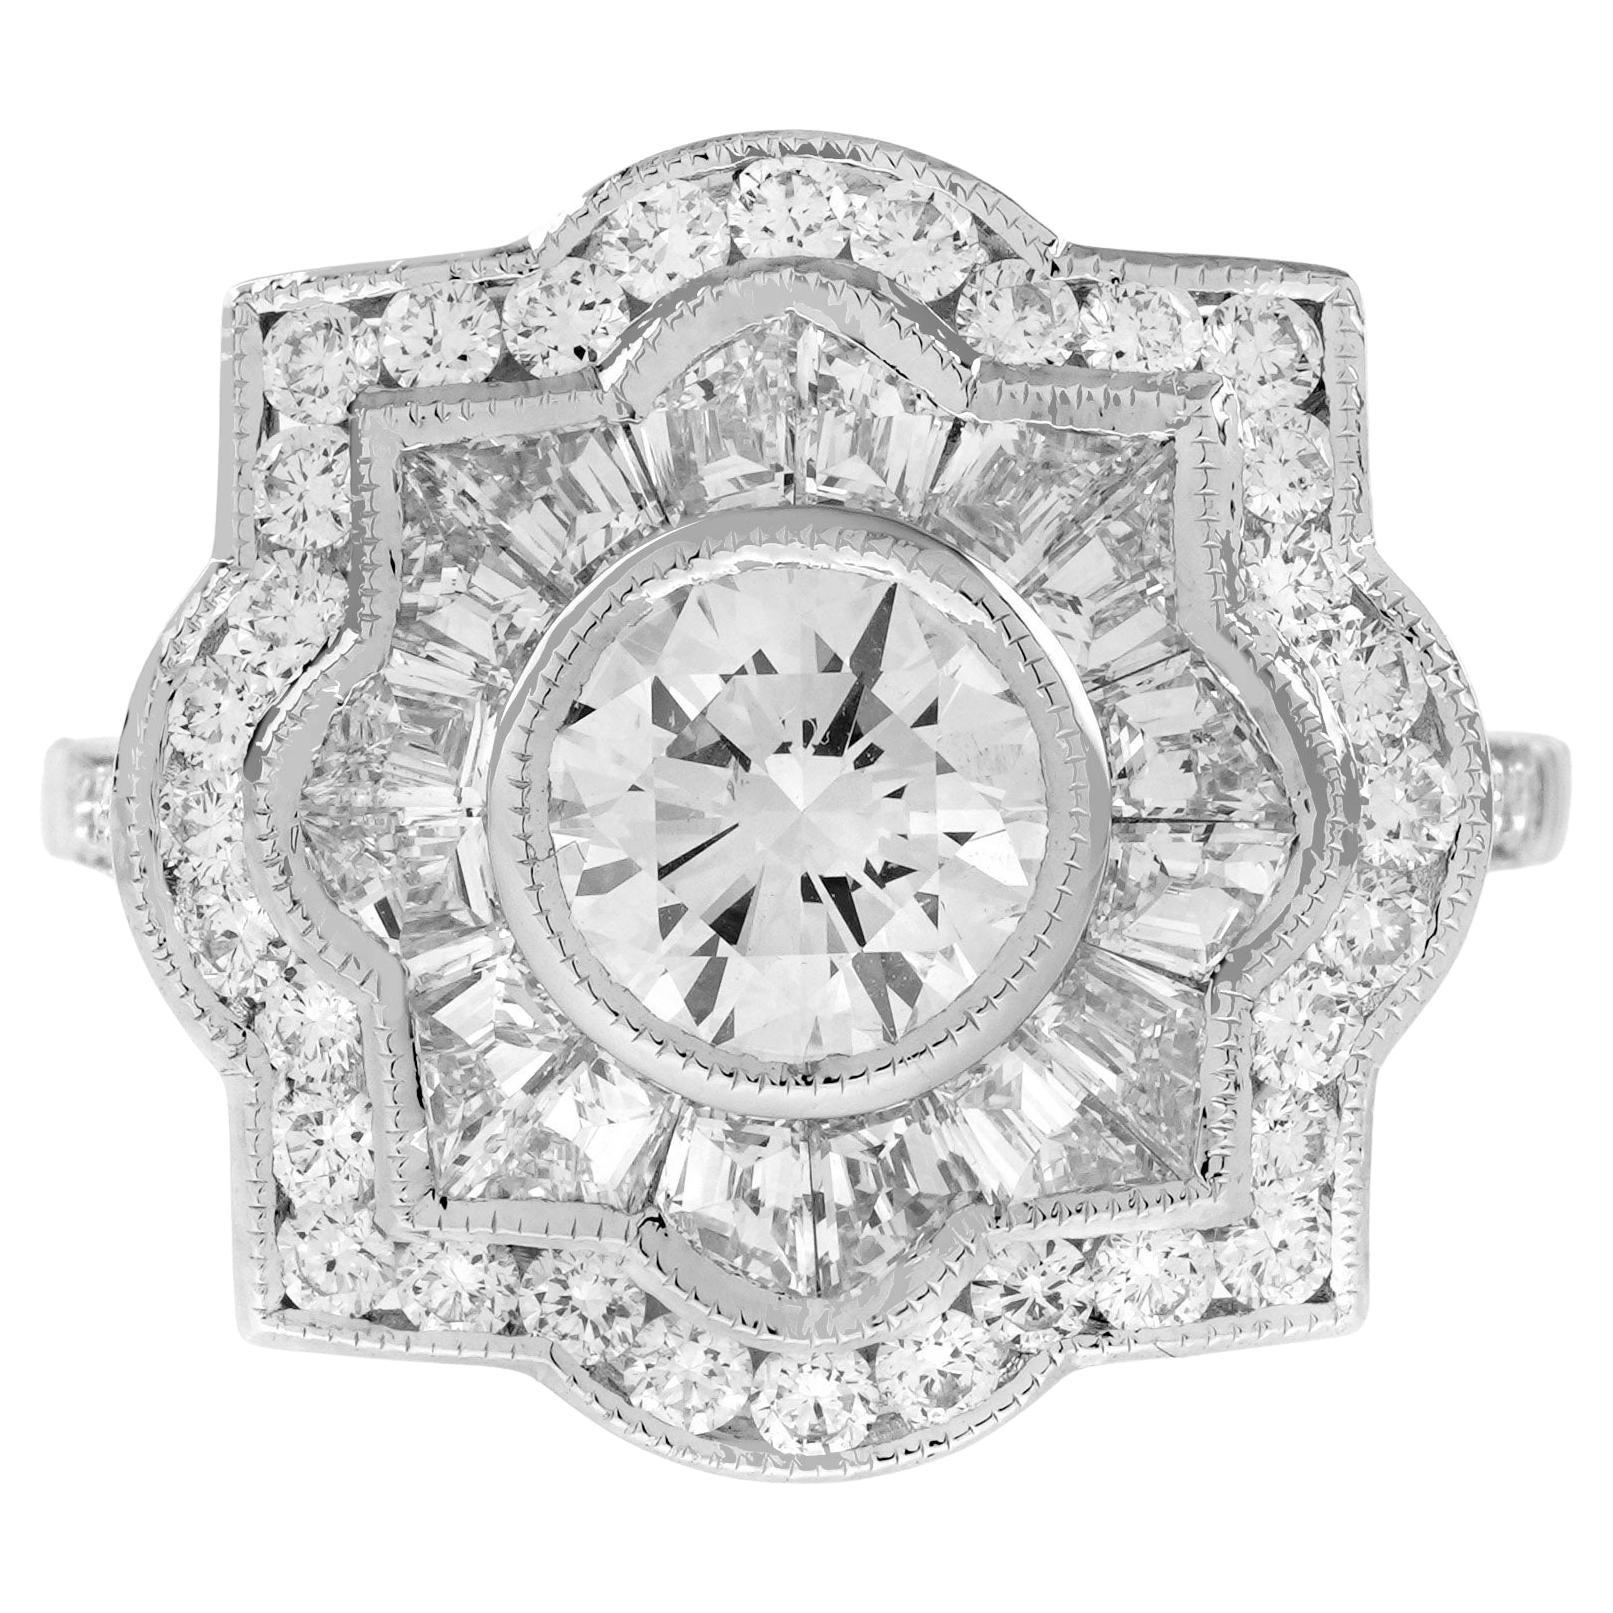 1.00 Ct. Diamond Art Deco Style Target Engagement Ring in 18K White Gold